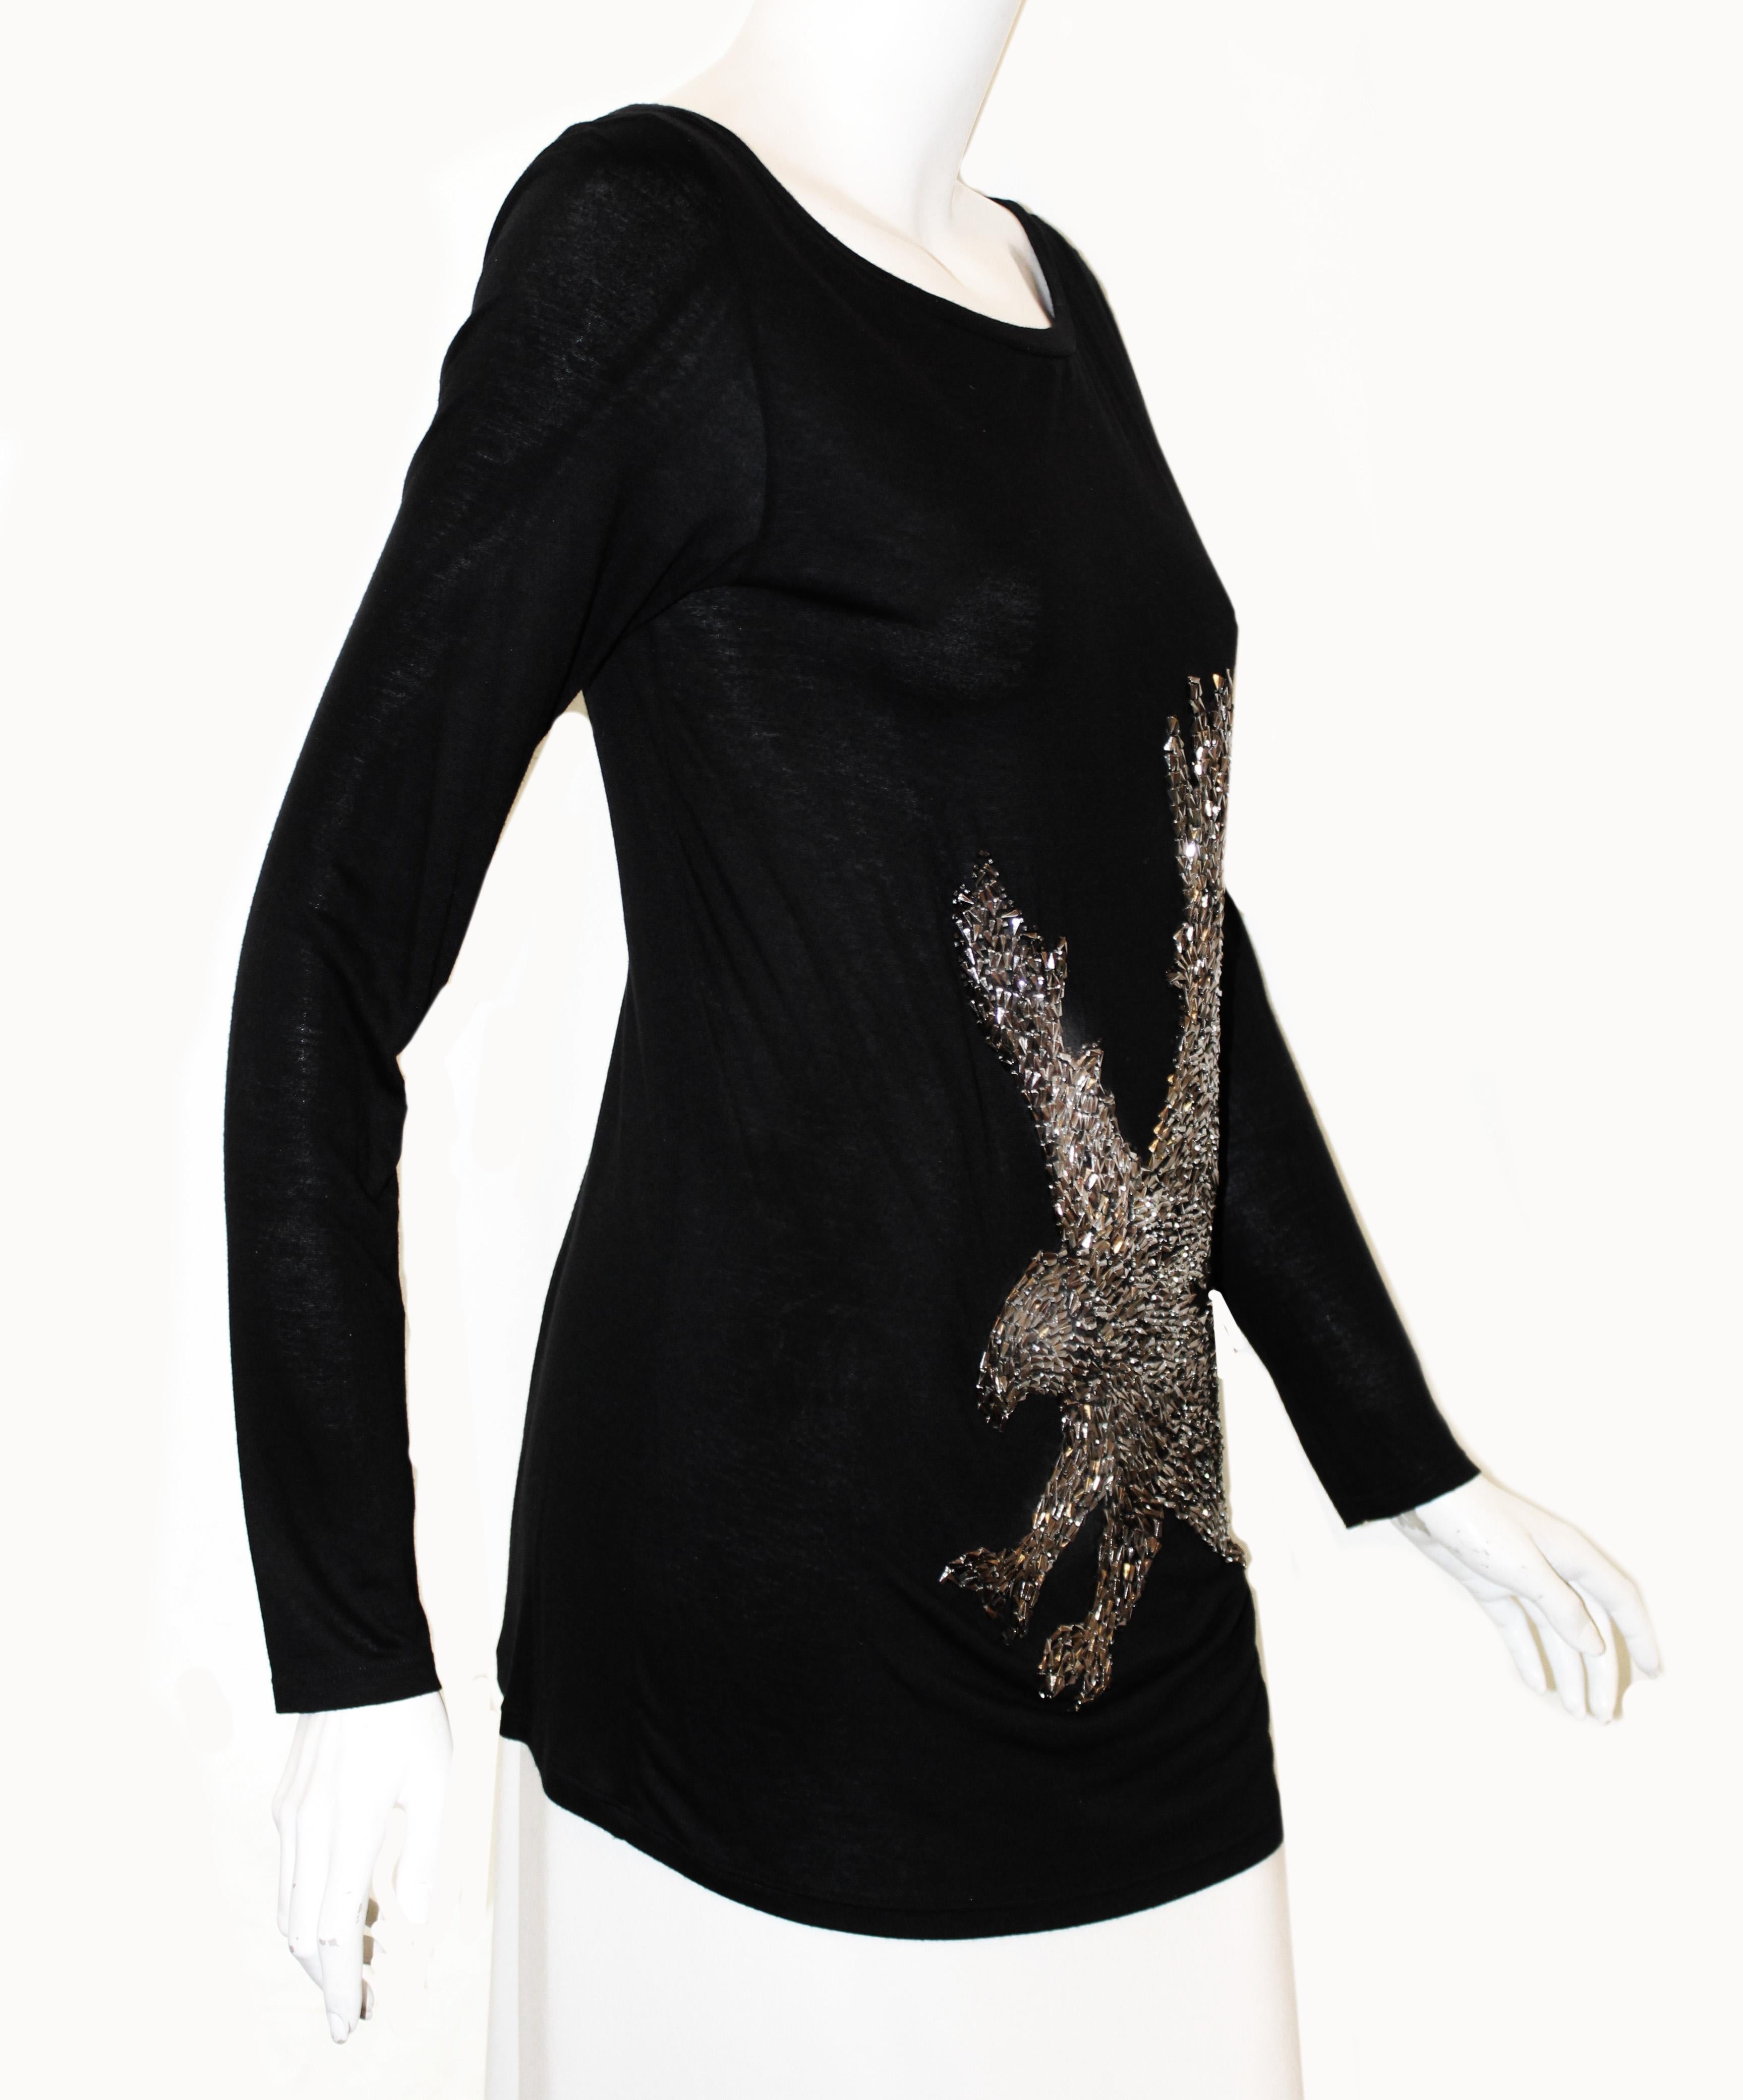 Emilio Pucci black long sleeve bateau neckline has dressed up with an outstanding handmade sculpture of a flying eagle design.  Using pewter tone metal studs the soaring eagle is ready to catch his prey!   This top is not lined and is in excellent